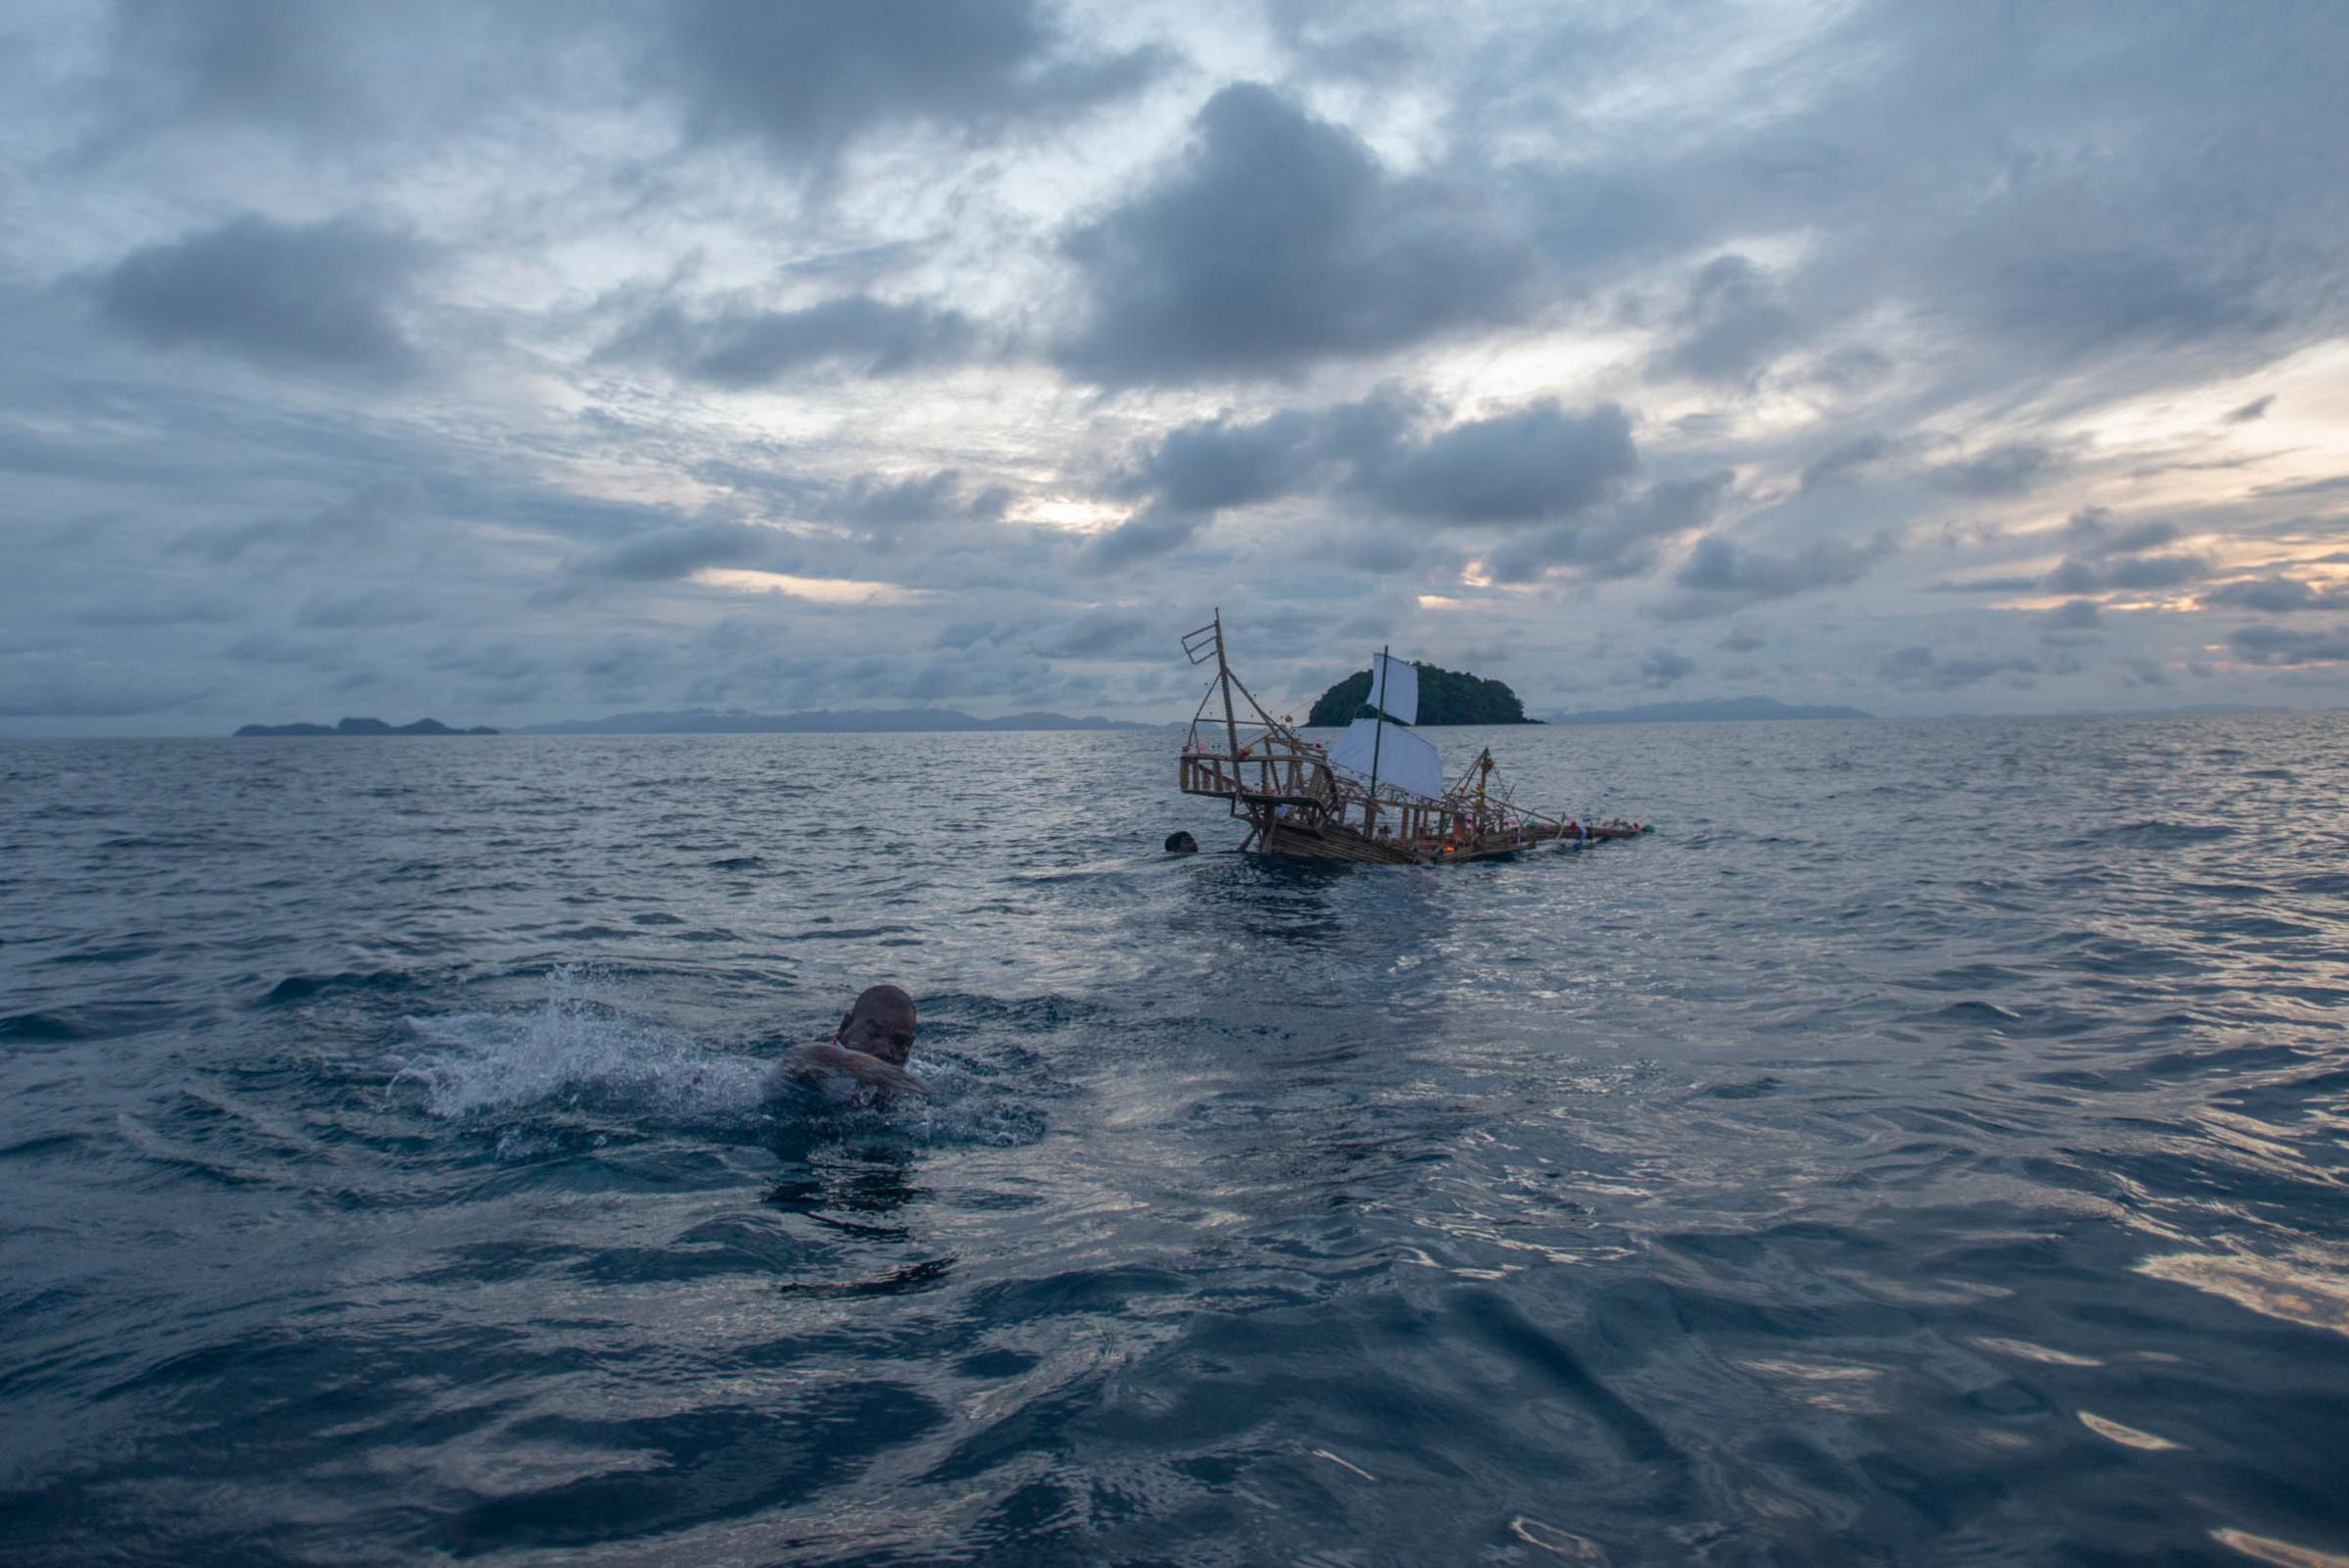 Lipe Island - A native gypsy swims back to the boat after floating a...